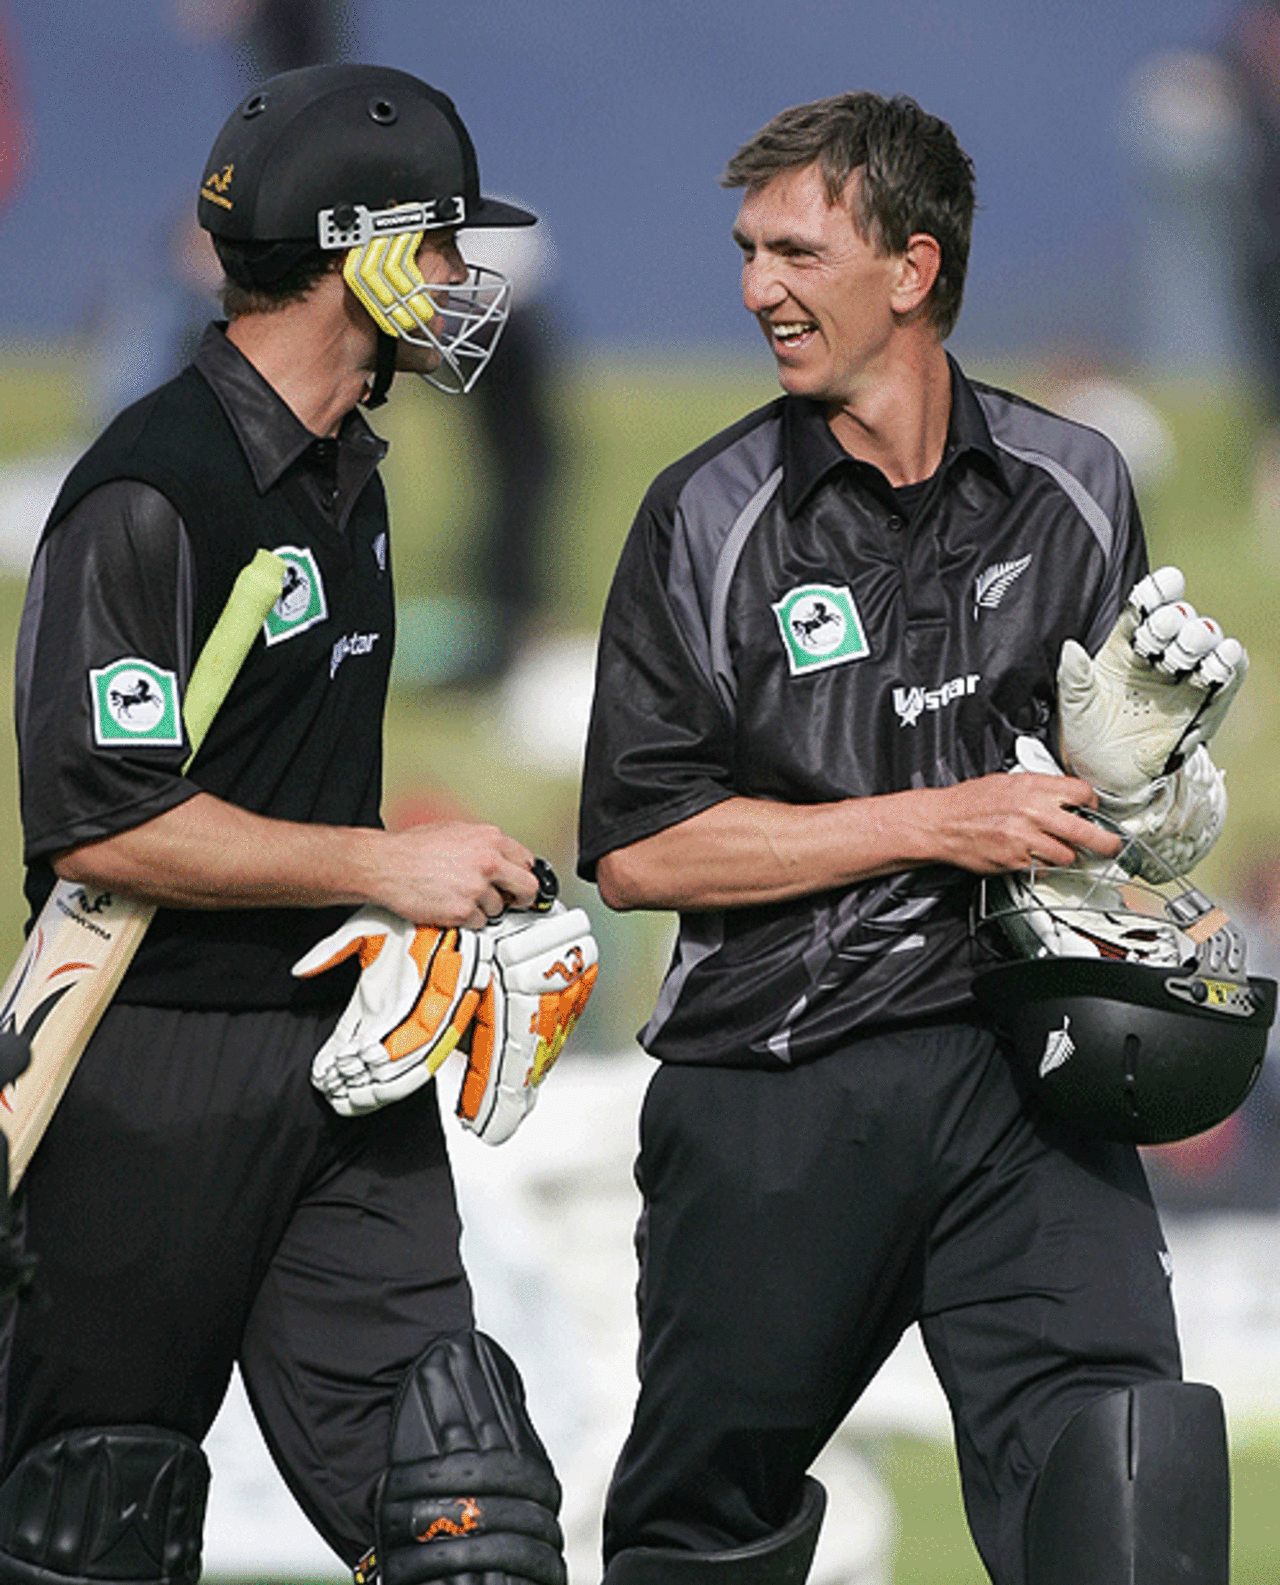 "Man, you had my heart pumping there, Mike!" A relieved James Franklin savours the moment with Michael Mason after a last-ball finish, New Zealand v Sri Lanka, 2nd ODI, Queenstown, December 31, 2006